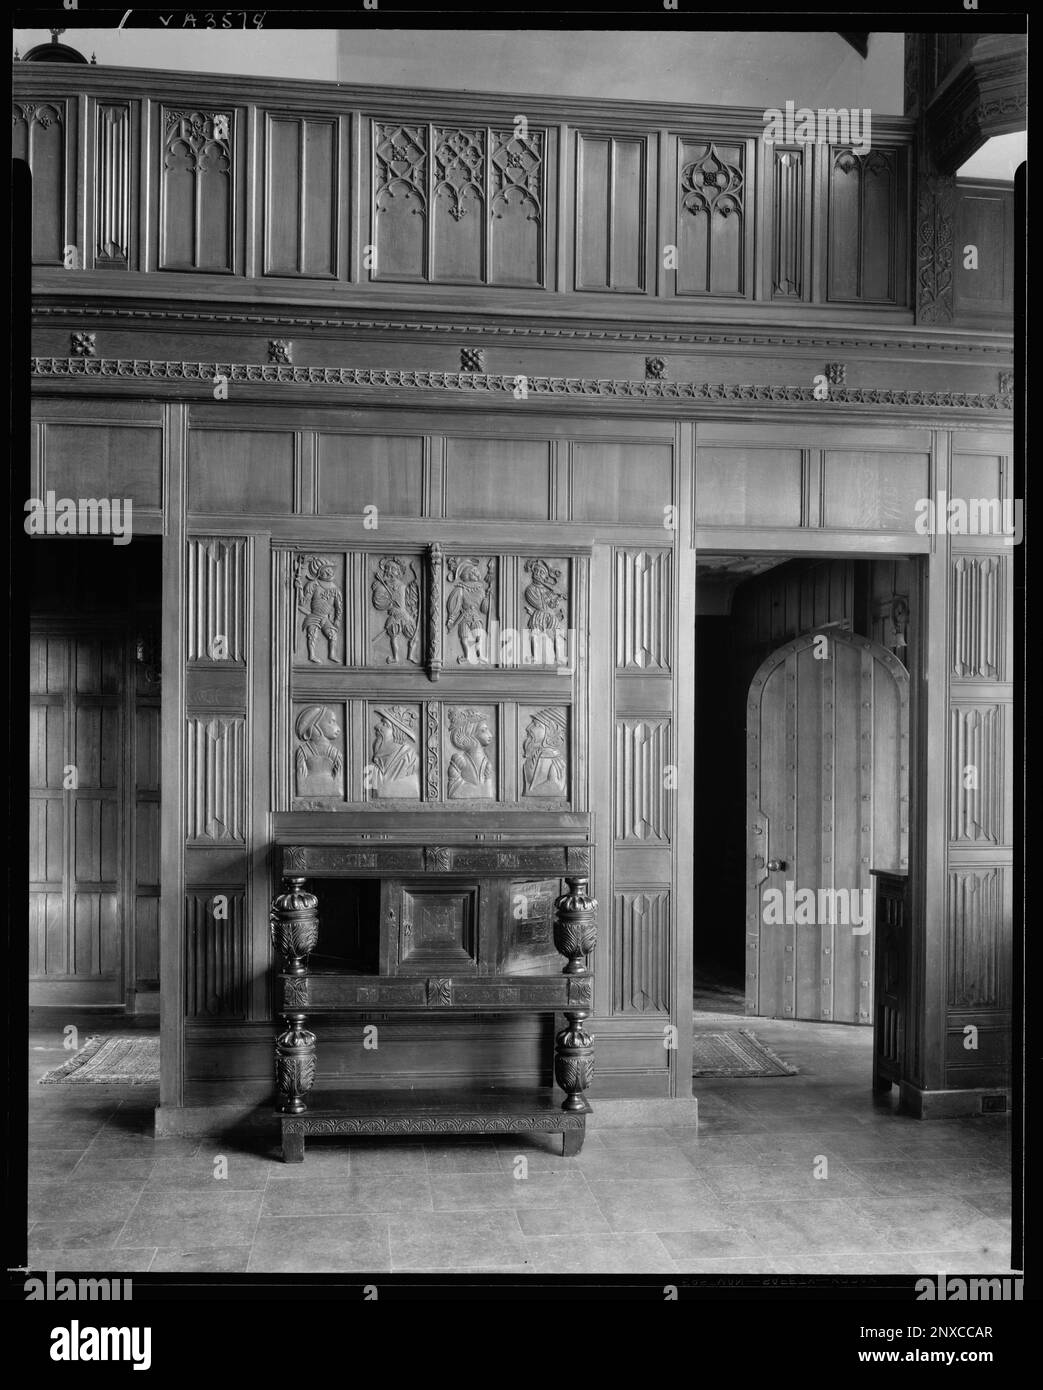 Agecroft Hall, Richmond, Henrico County, Virginia. Carnegie Survey of the Architecture of the South. United States  Virginia  Henrico County  Richmond, Doors & doorways, Paneling, Woodwork, Interiors. Stock Photo